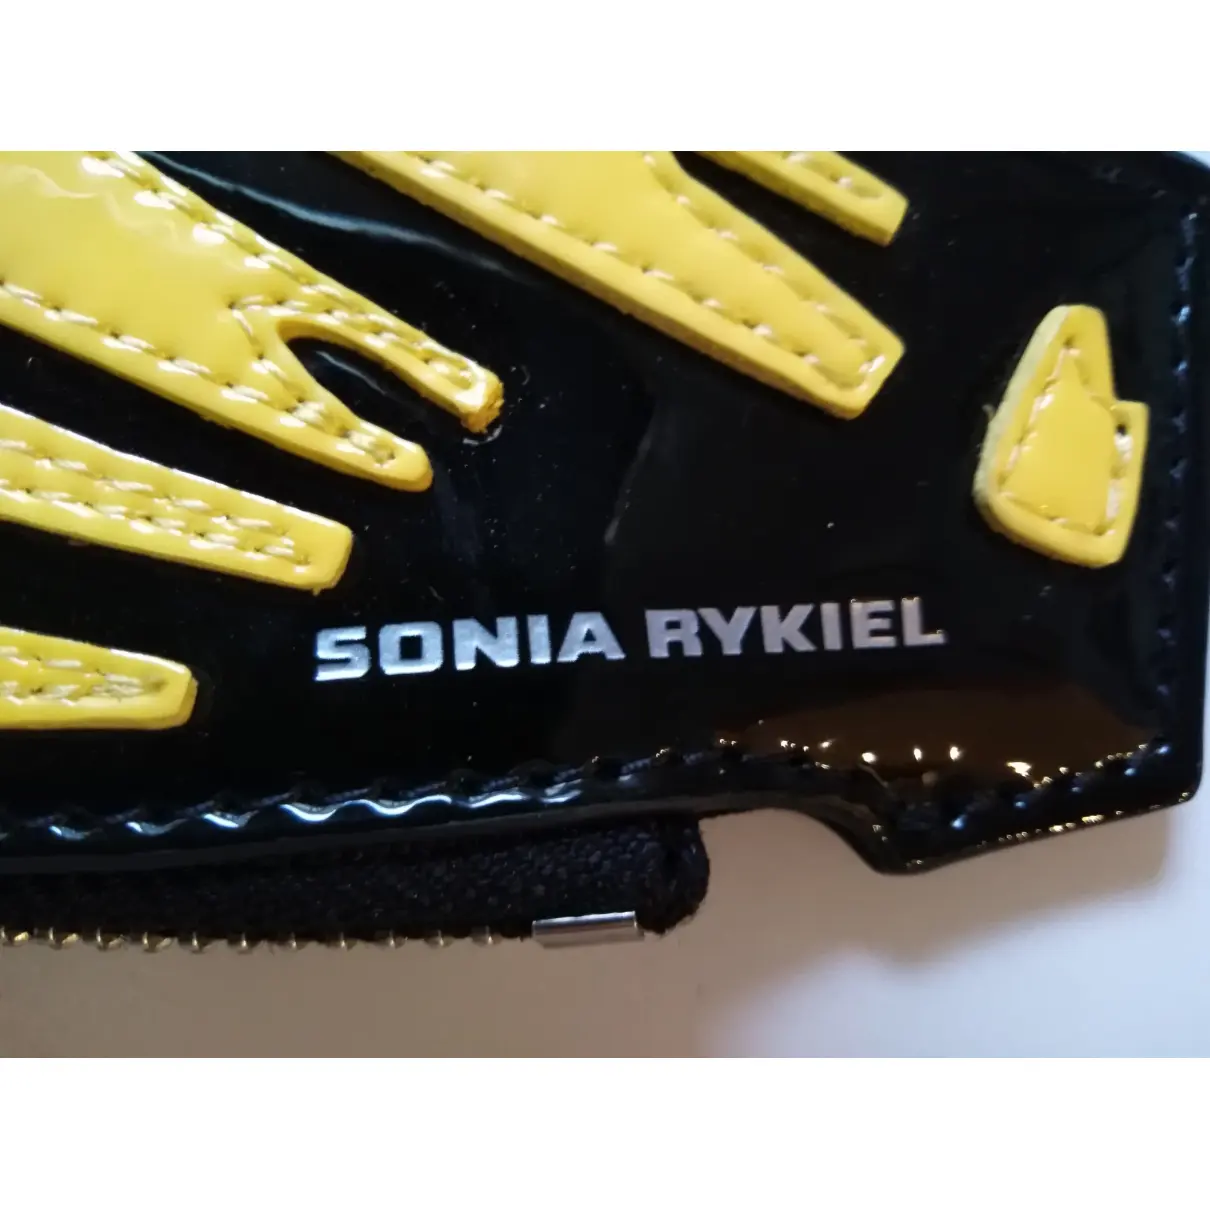 Patent leather clutch bag Sonia by Sonia Rykiel - Vintage